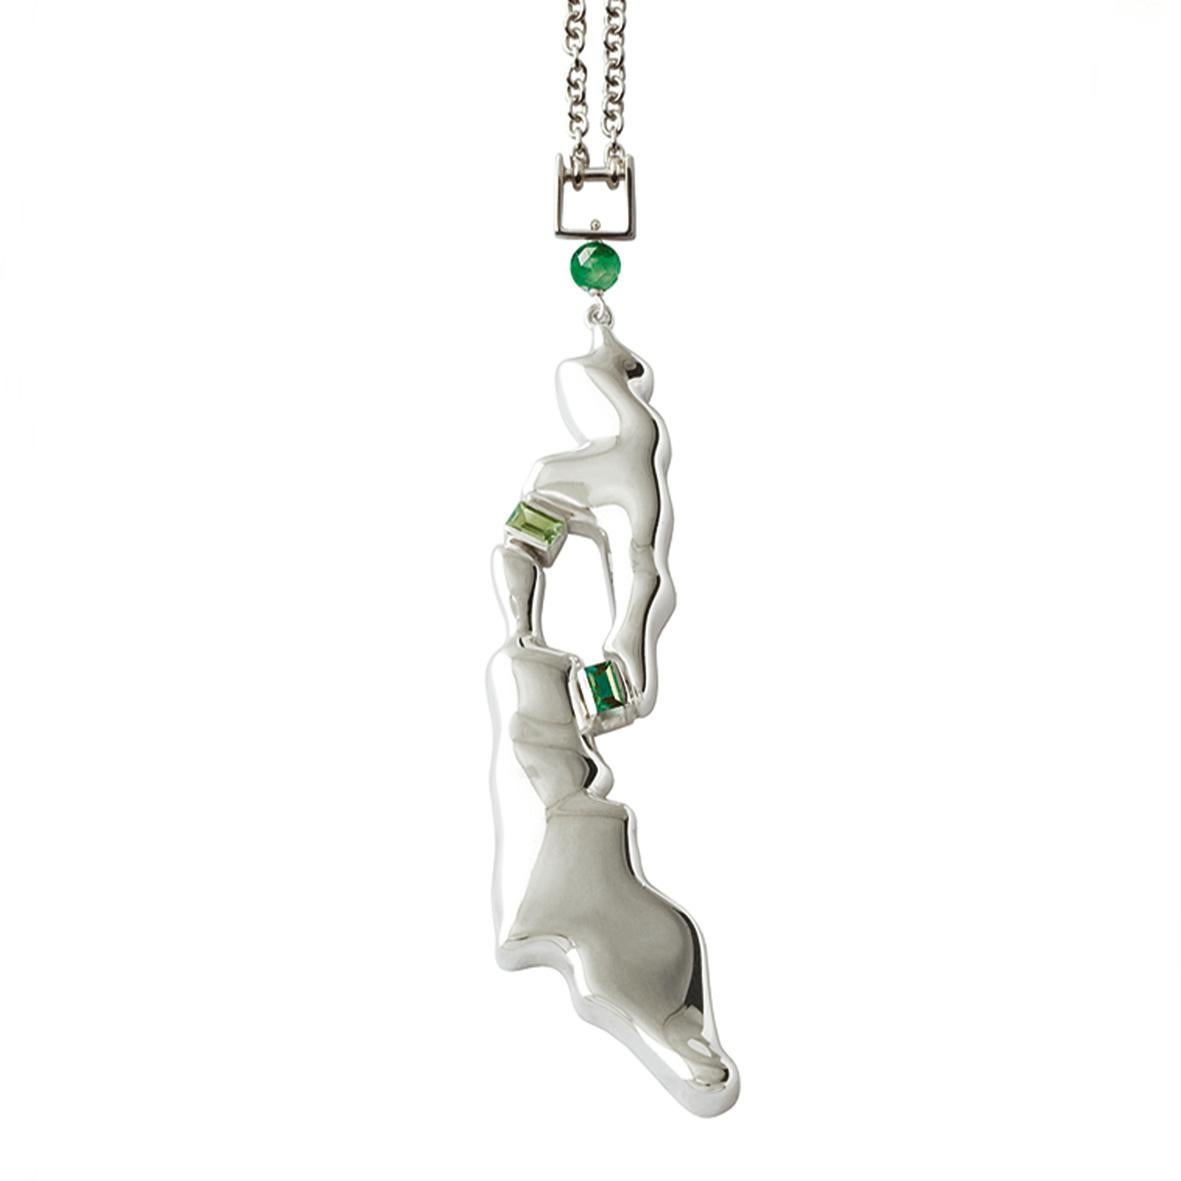 Made by hand in Nathalie Jean's Milan atelier in limited edition, the Mercure drop pendant necklace is composed of 2 elements in rhodium plated sterling silver linked by green baguette cut tourmalines set in clever little open bezel. Small,